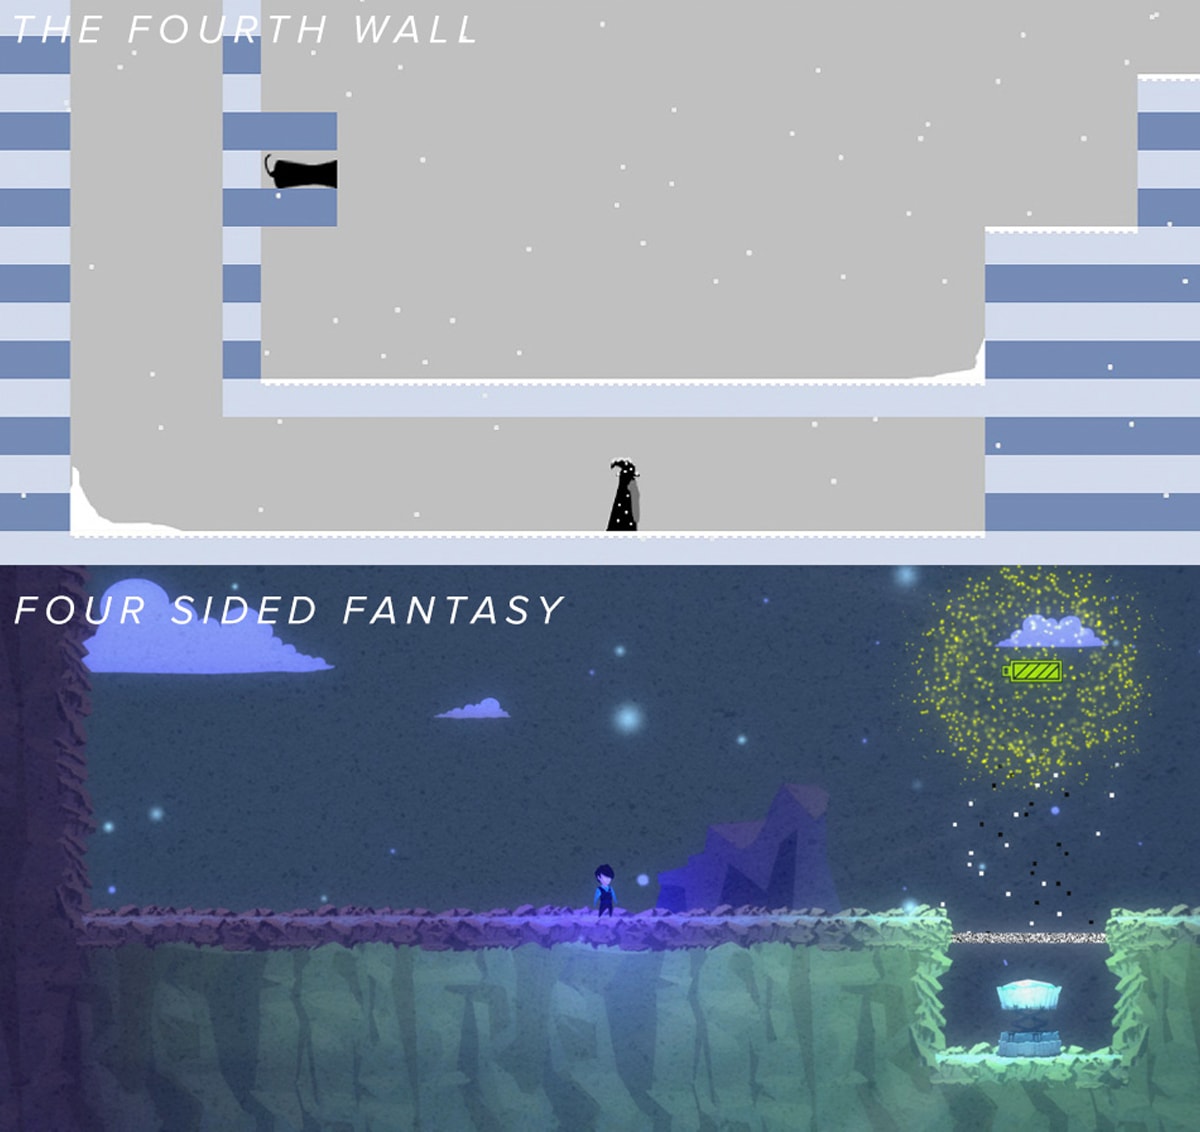 Comparison of screenshots from The Fourth Wall and Four Sided Fantasy